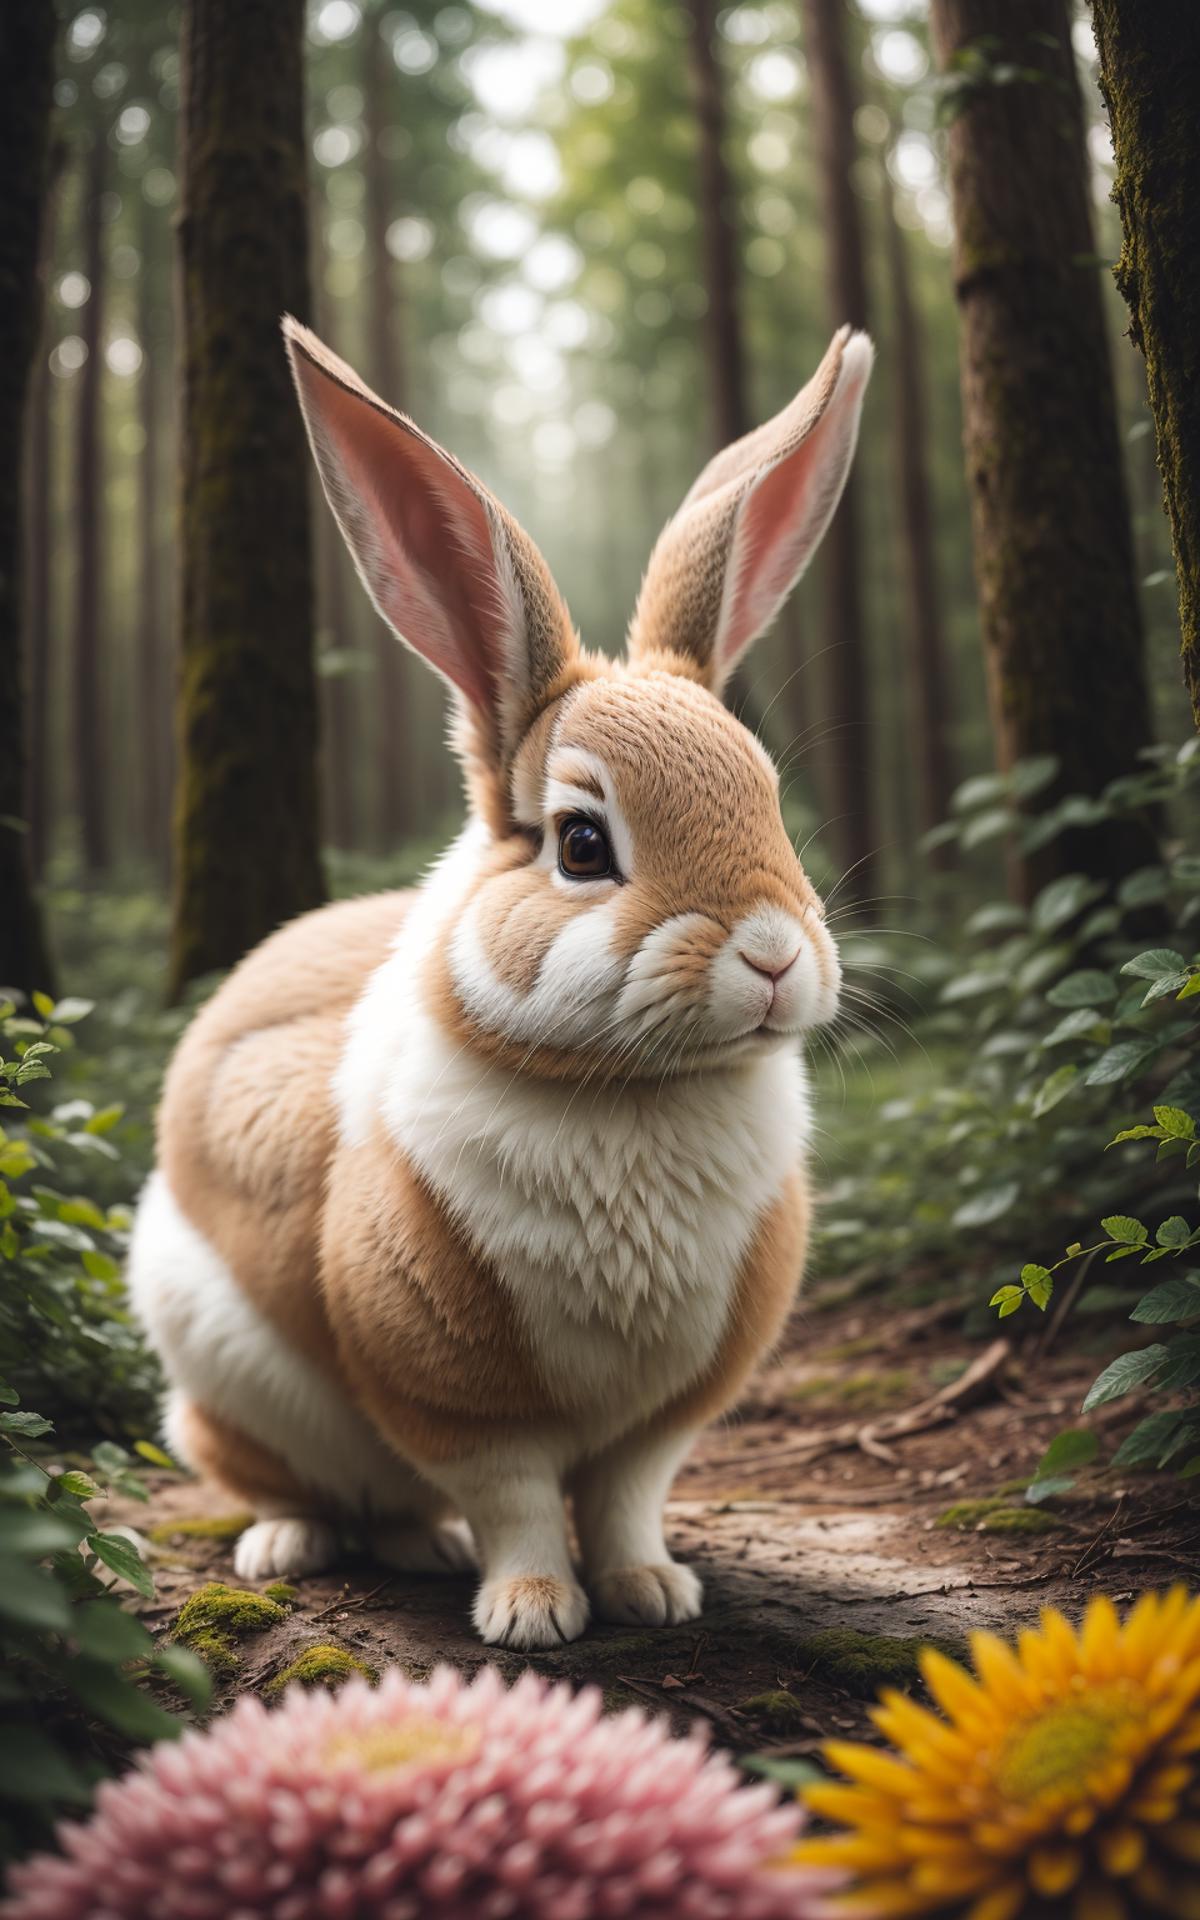 A cute brown and white rabbit in the woods.